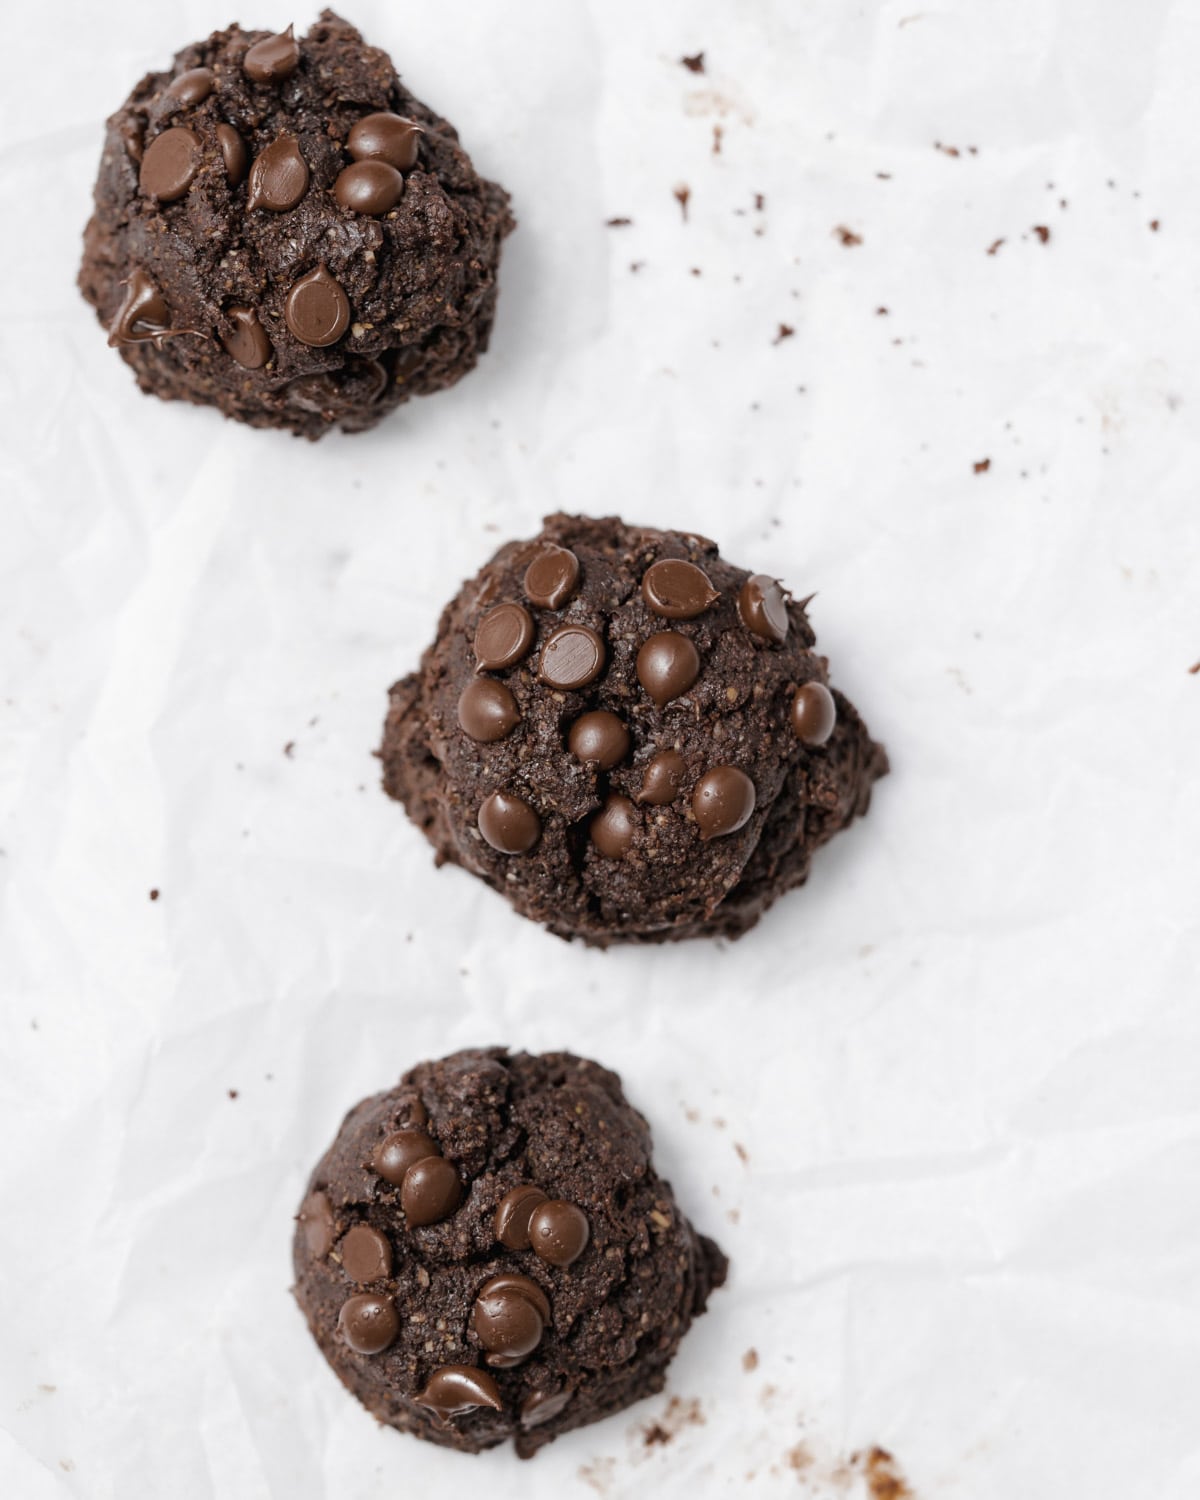 Top view of 3 chocolate brownie cookies on a white parchment paper.